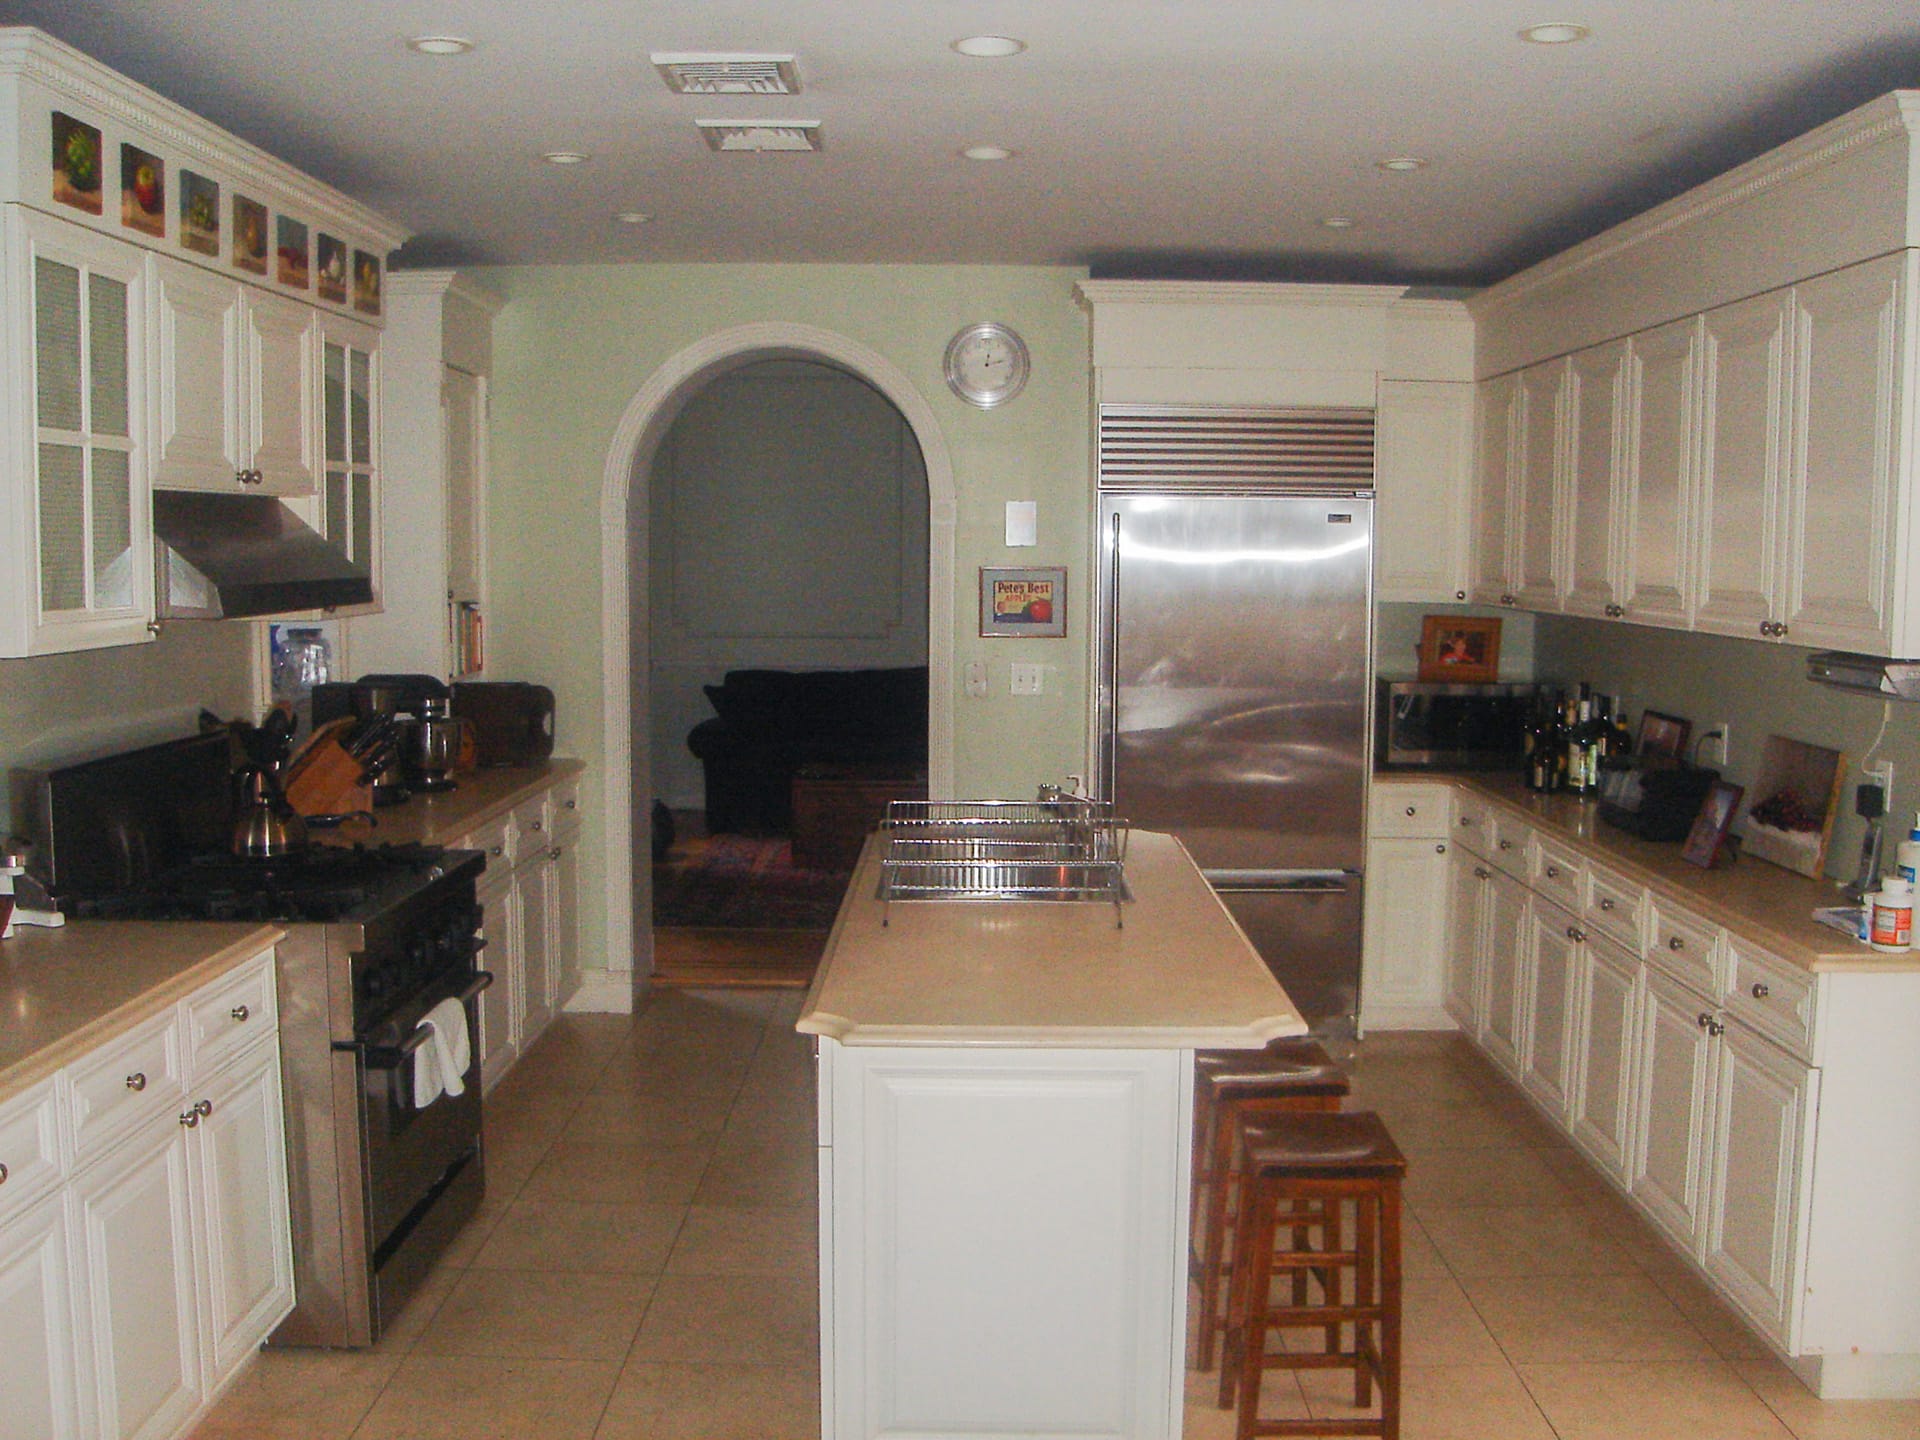 Kitchen of a Brooklyn Heights Carriage house before our renovation